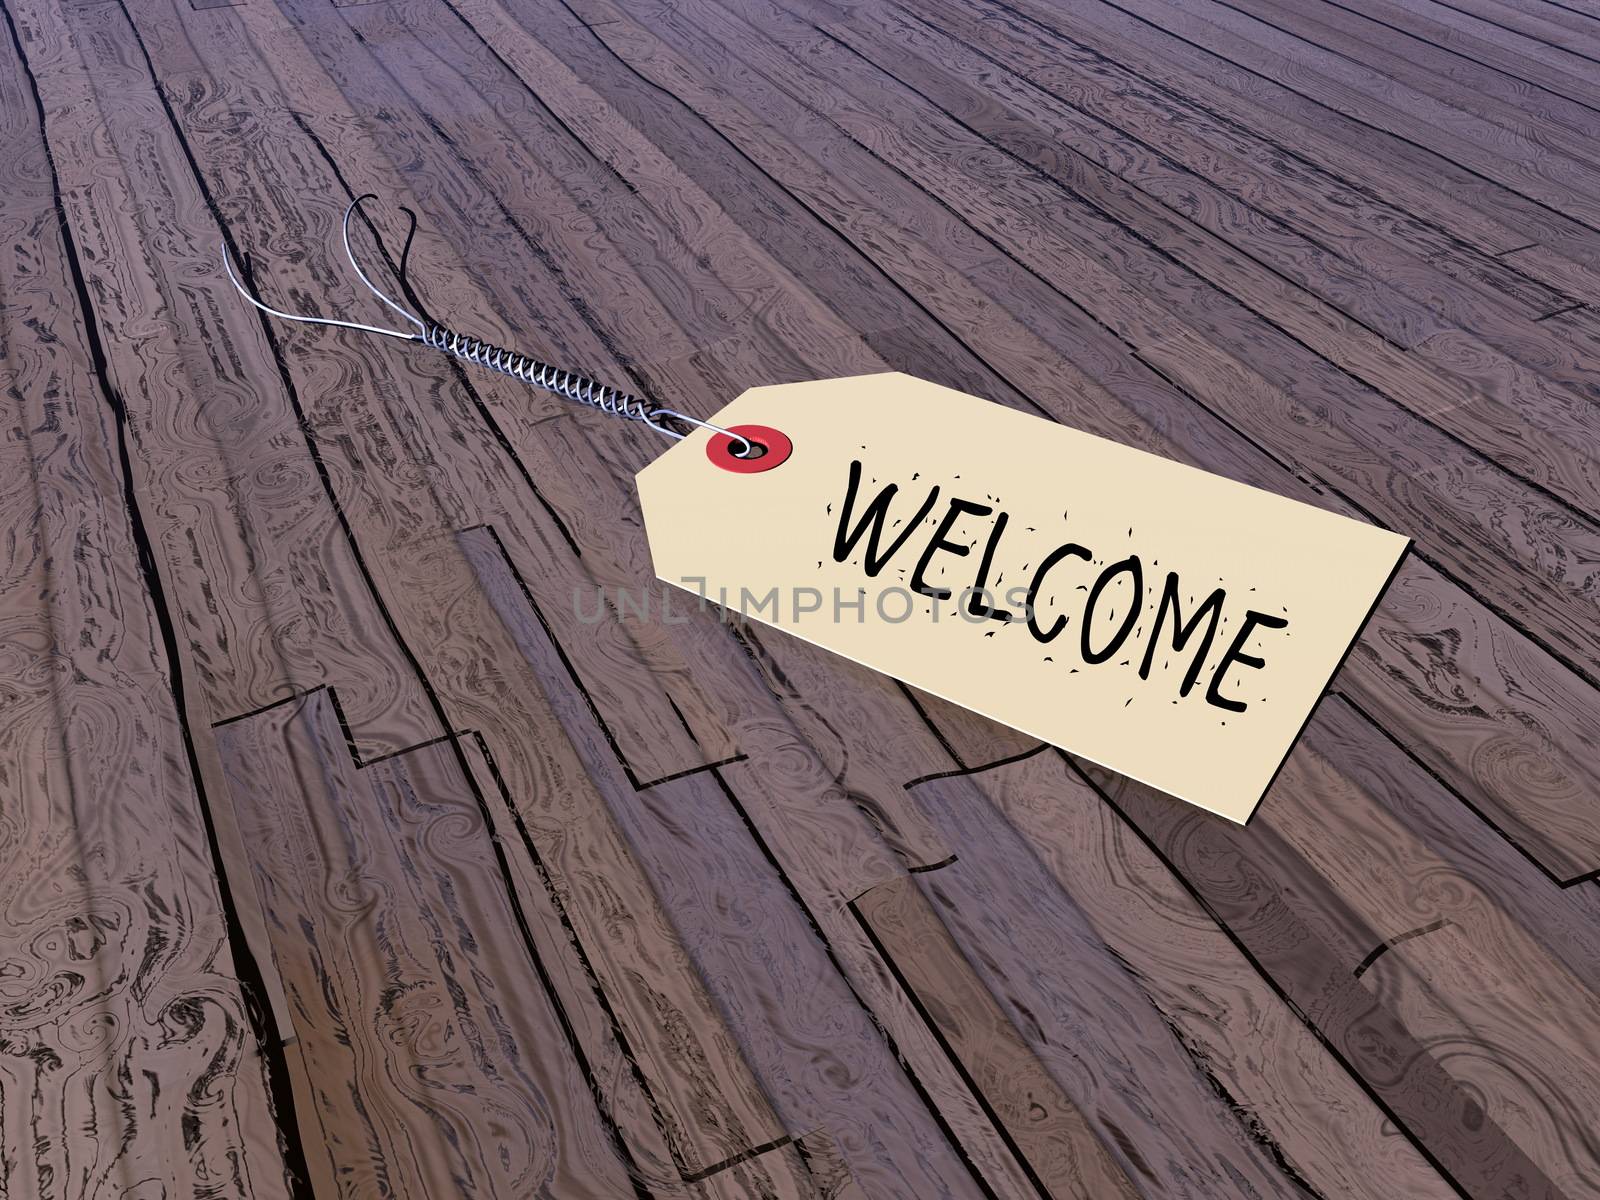 Tag or welcome on a vintage wooden floor - 3D render